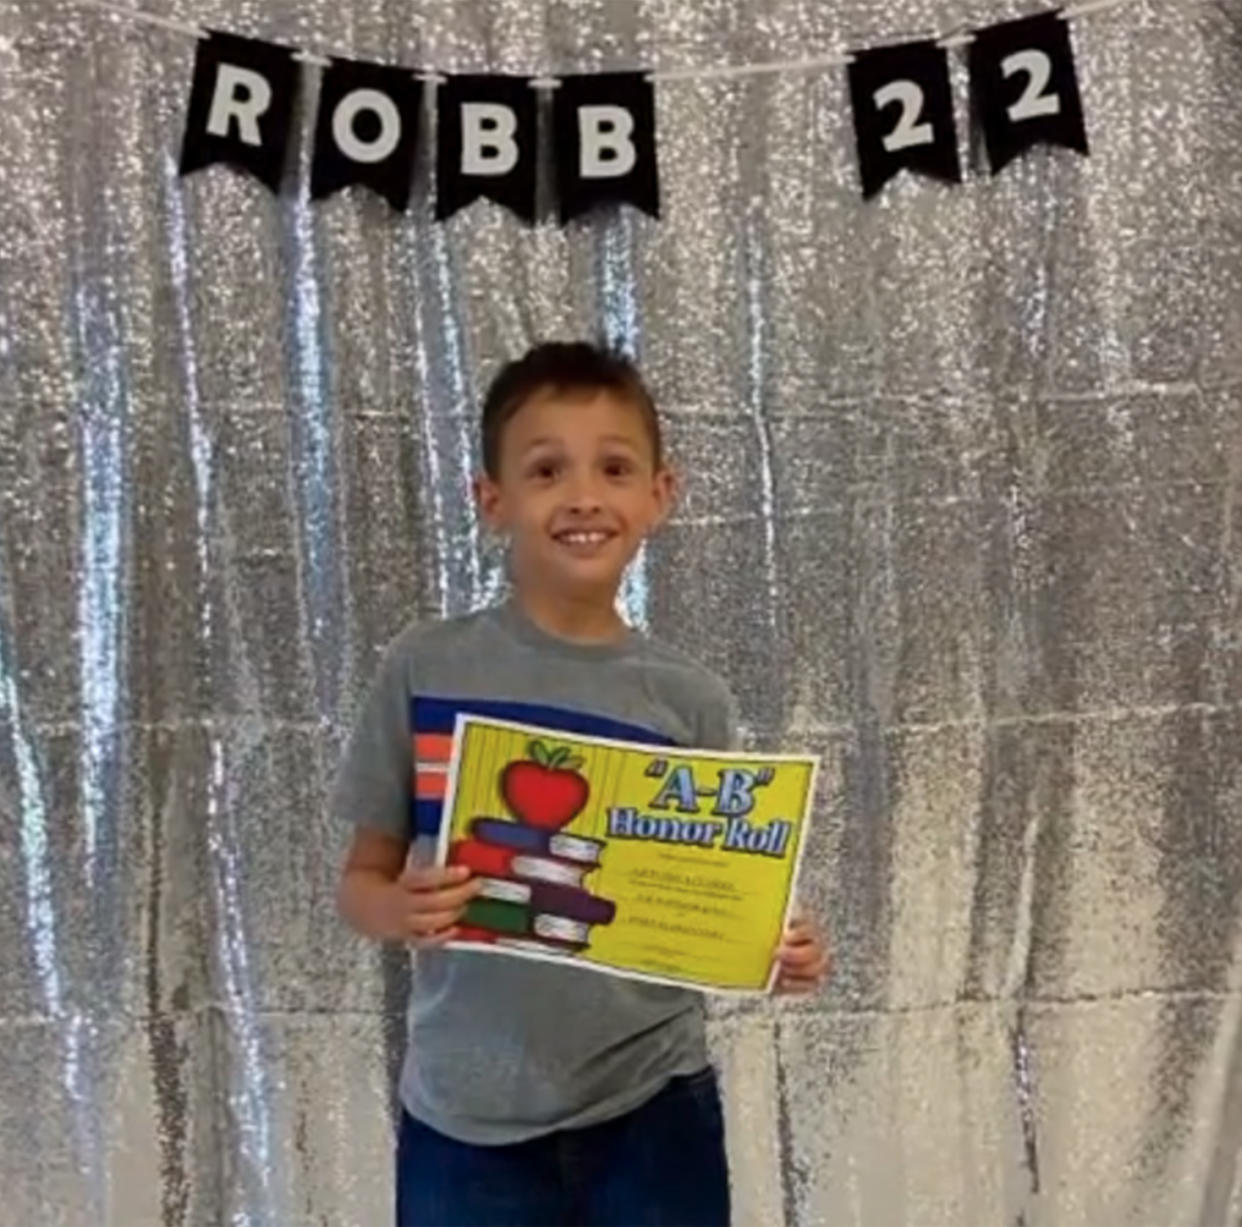 Chance Aguirre, a third-grade student at Robb Elementary School in Uvalde, Texas, hid from the gunman during the mass shooting on May 18, 2022.   (news4sanantonio.com)